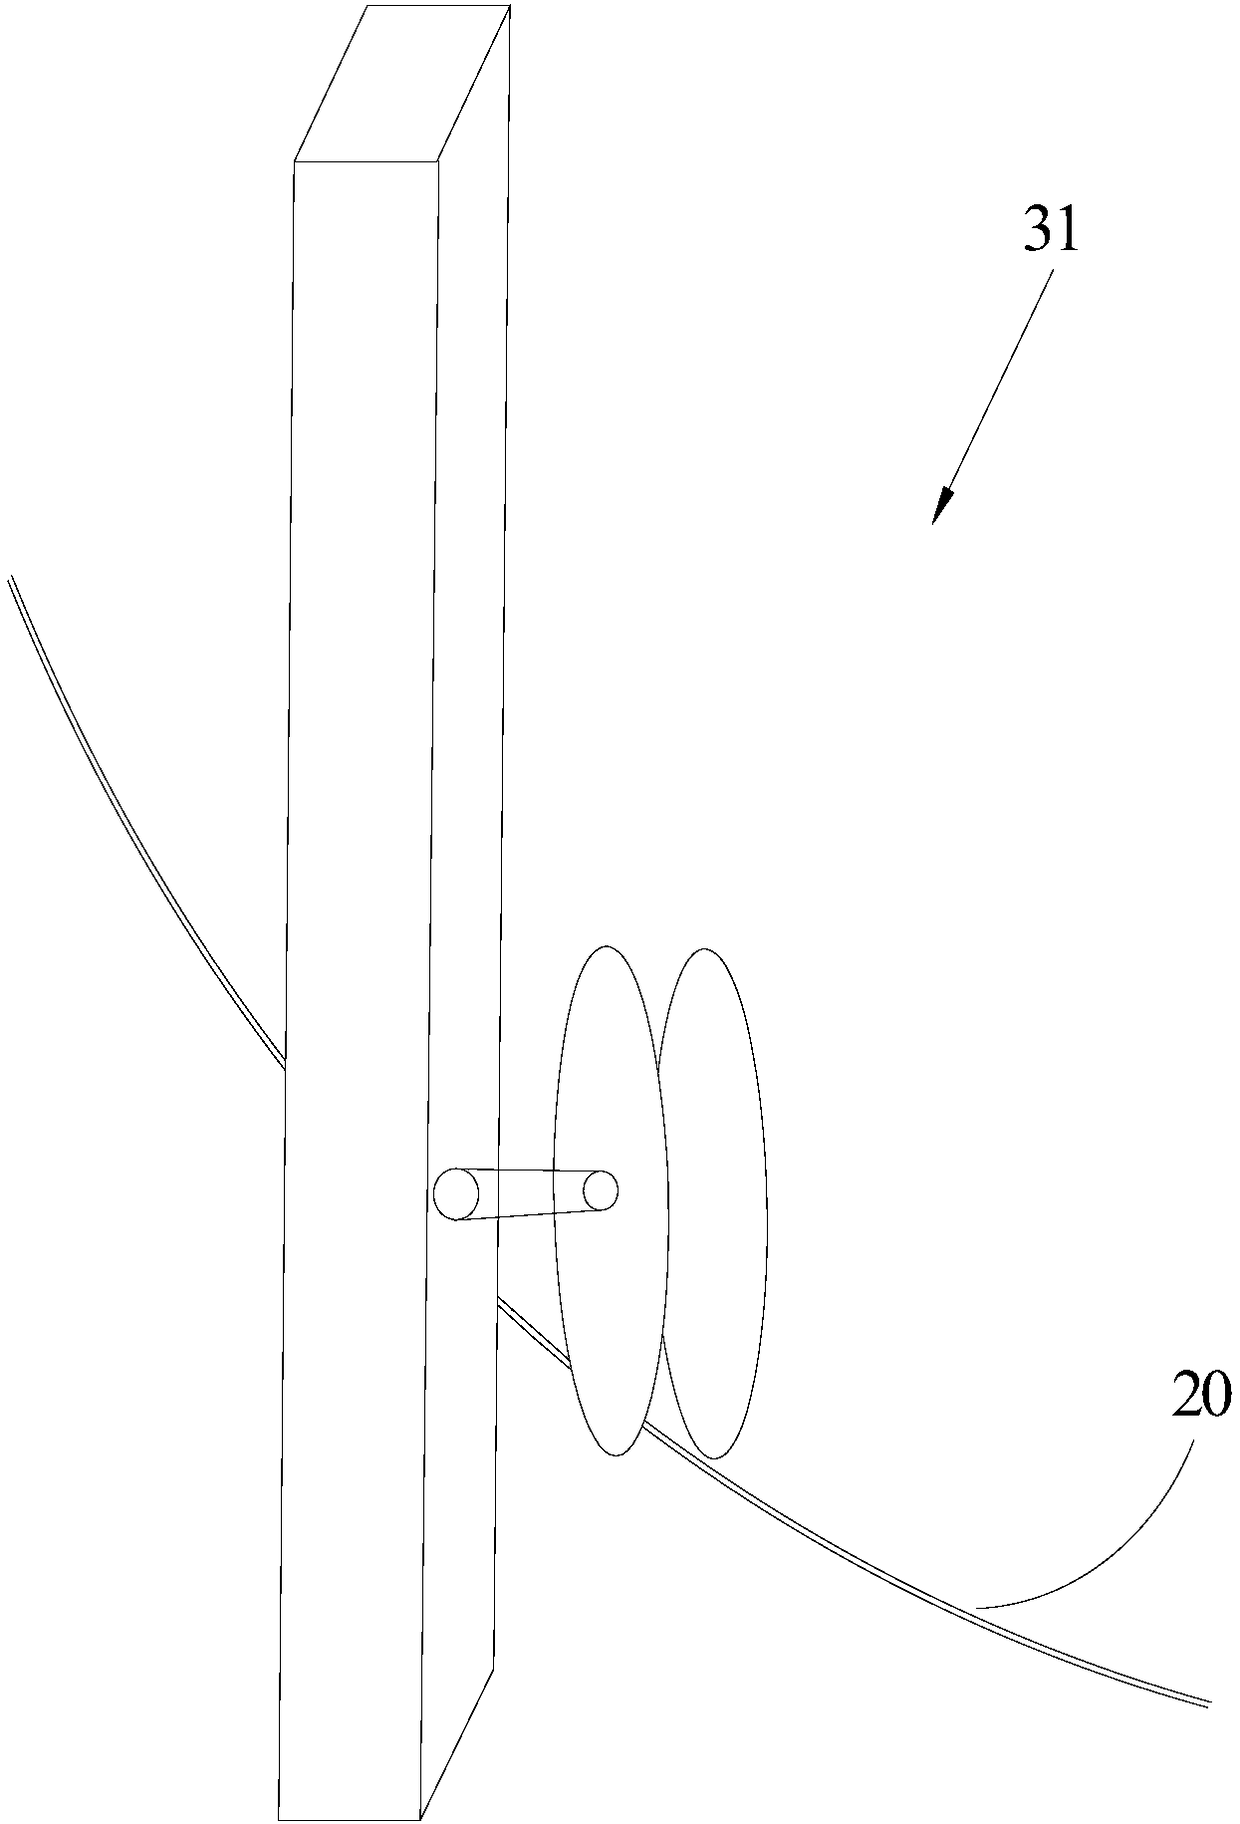 Construction method of orientated rope saw dismounting of large-size reinforced concrete